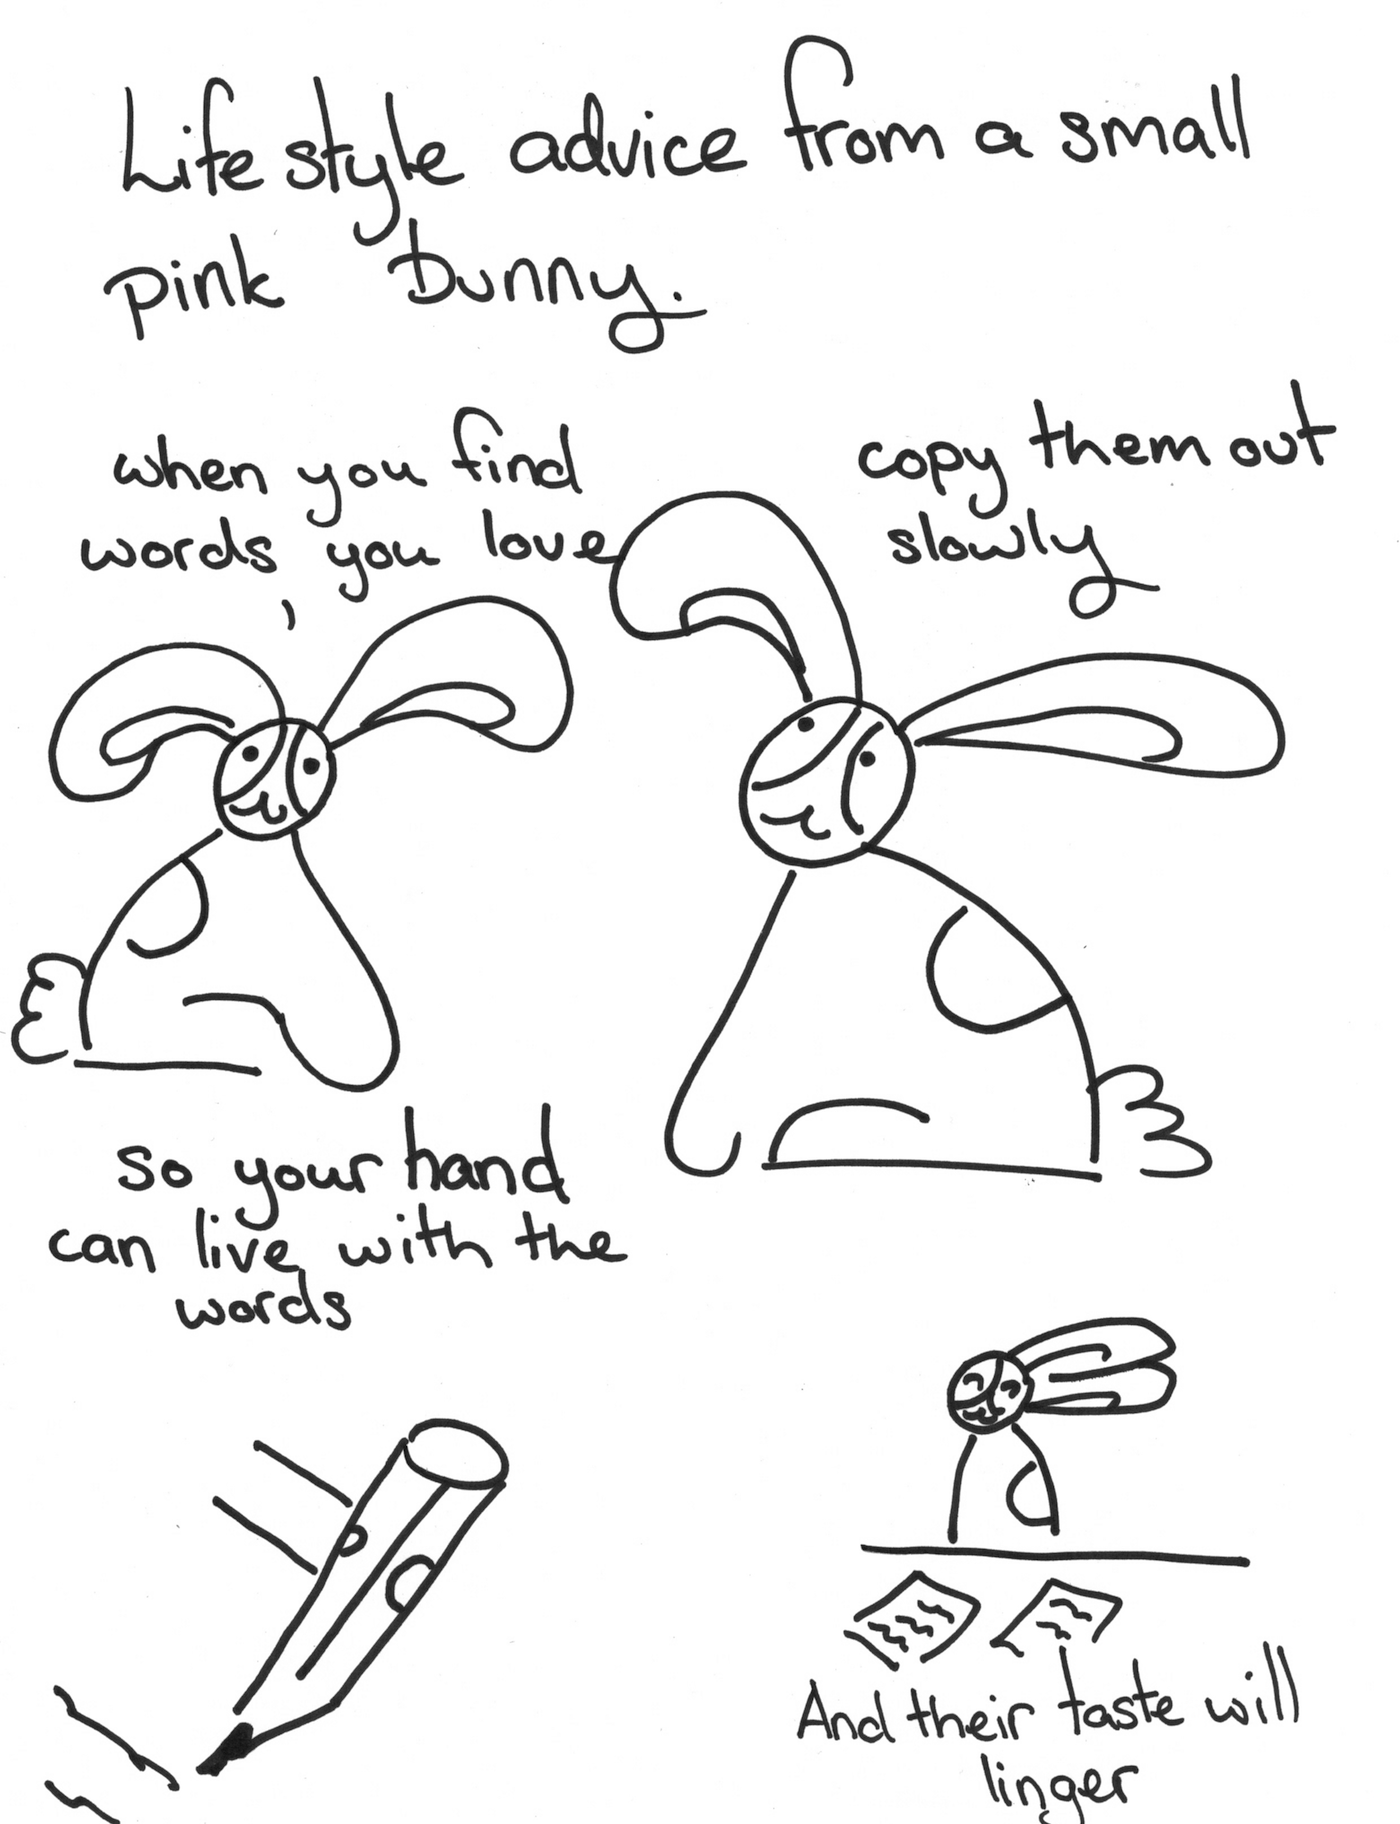 322: Lifestyle Advice from a Small Pink Bunny. Write it